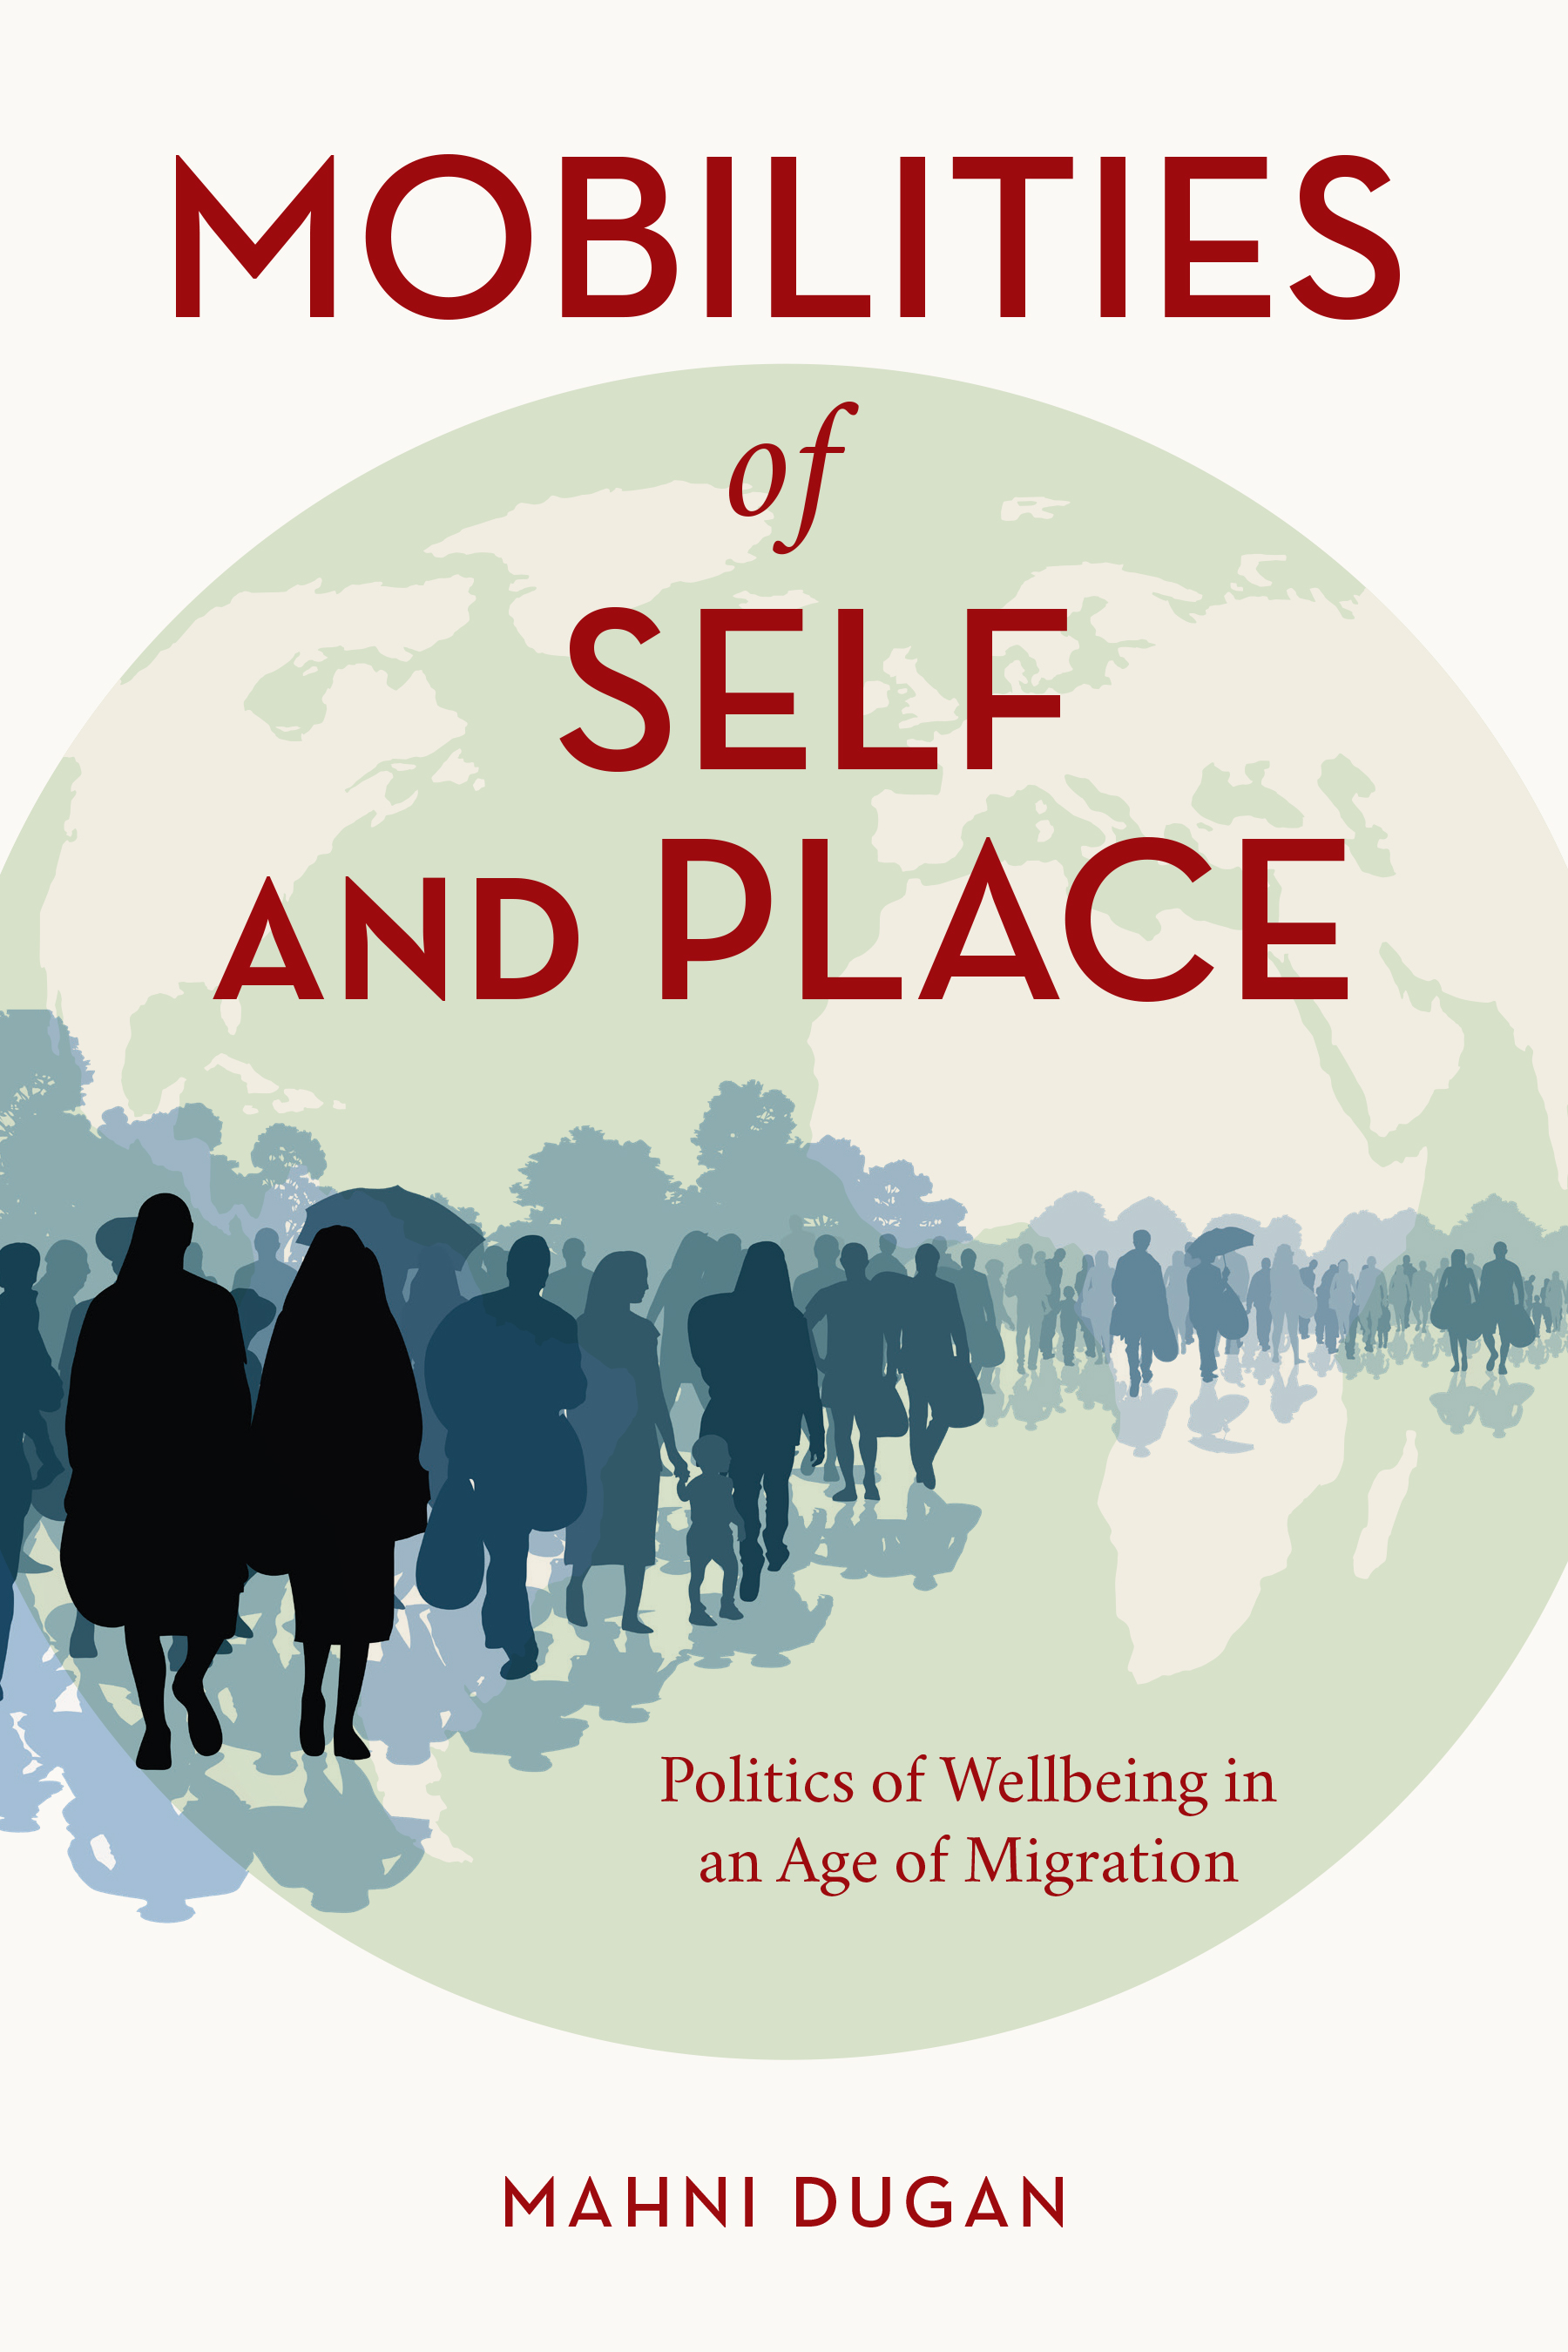 Mobilities of Self and Place: Politics of Wellbeing in an Age of Migration